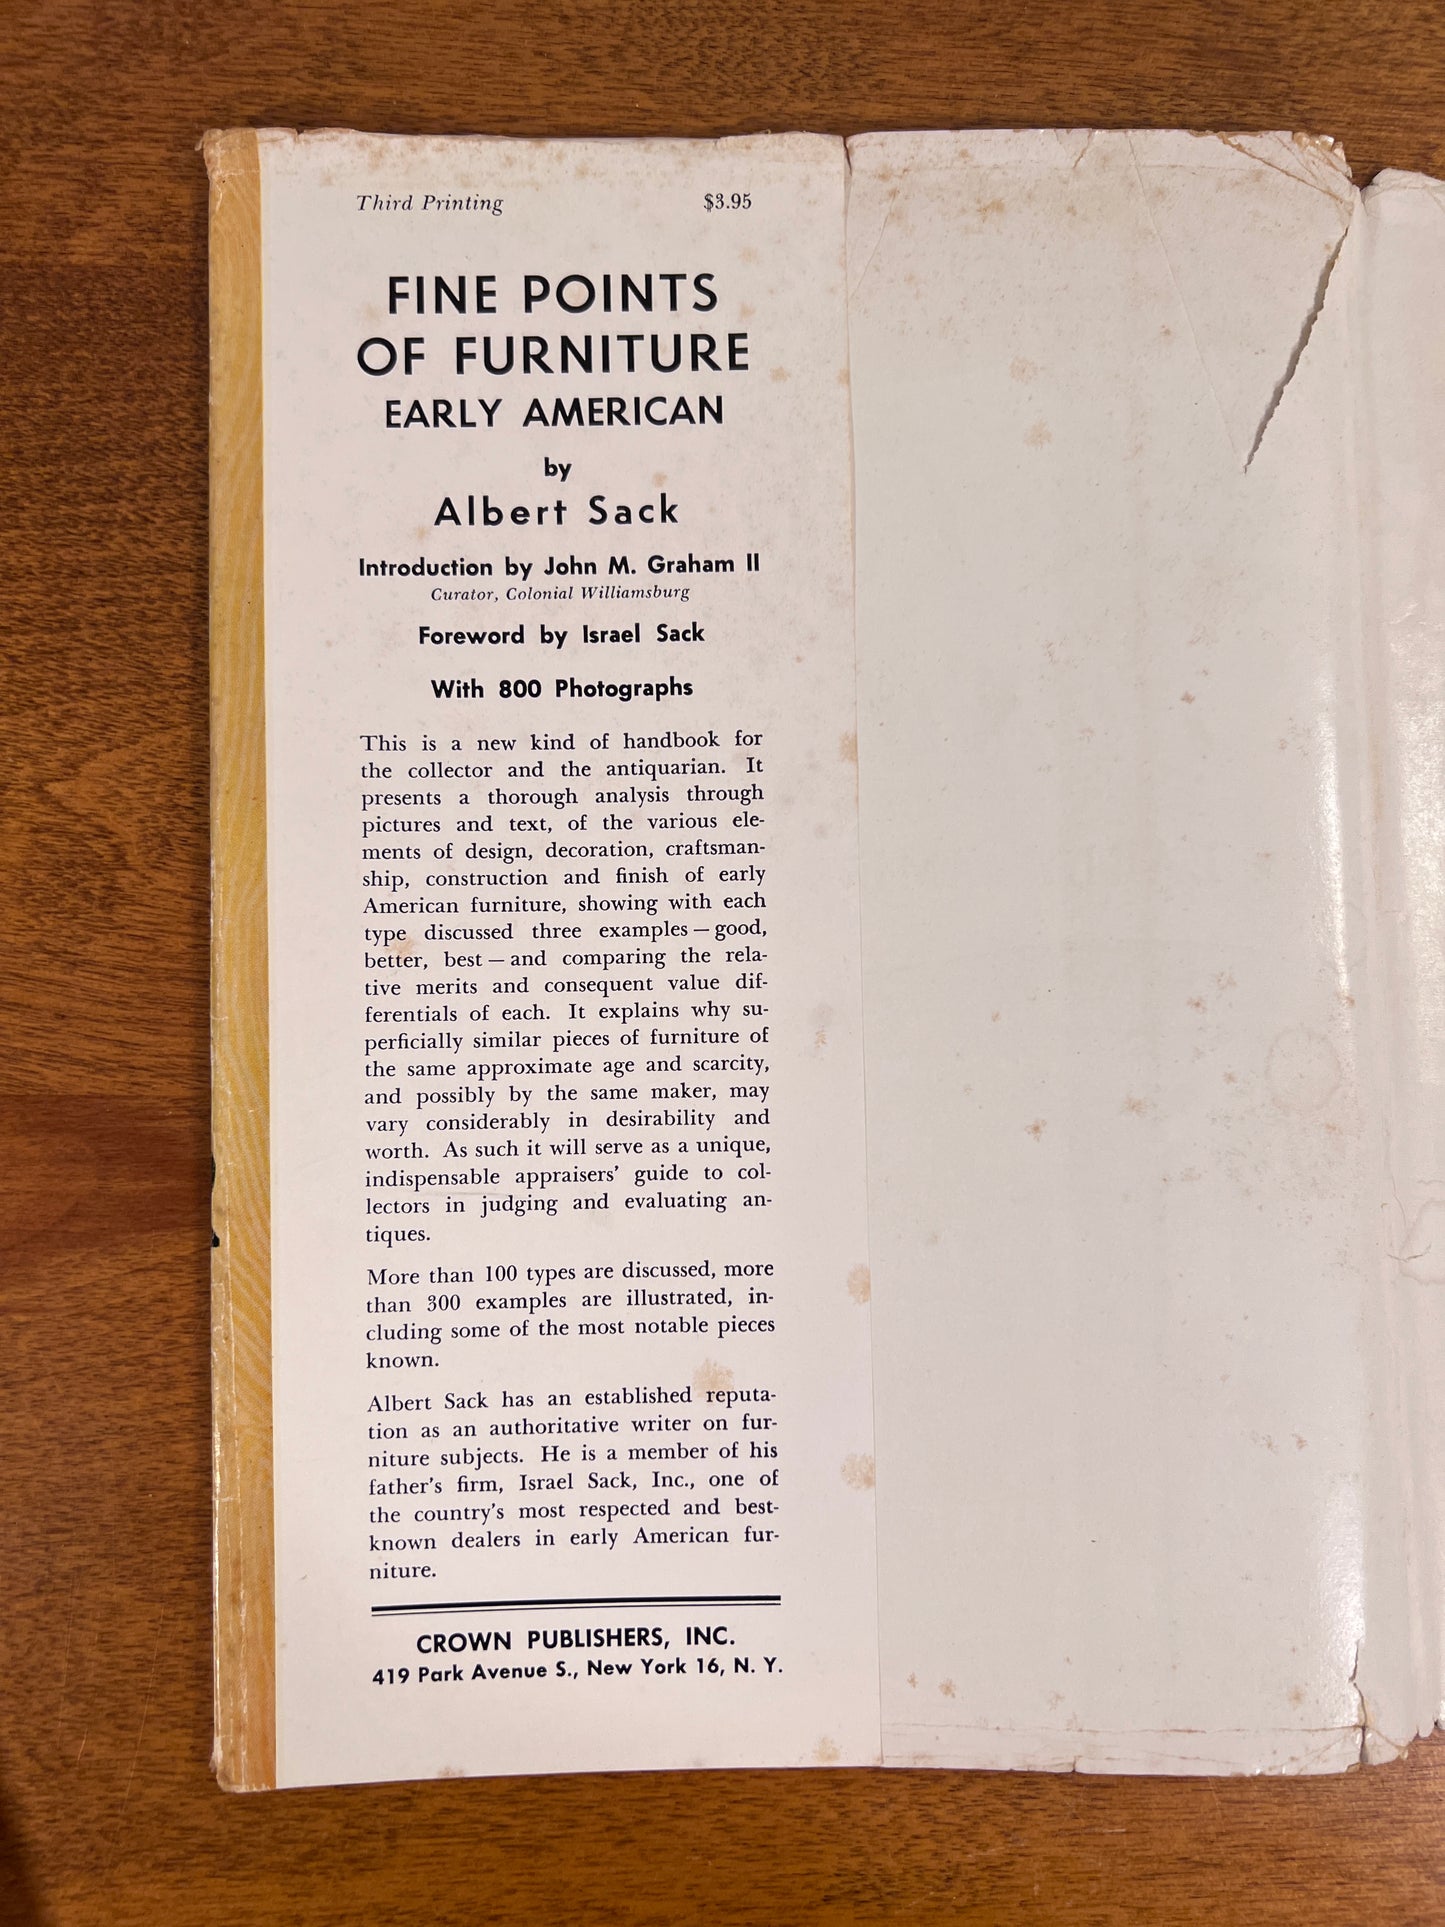 Fine Points of Furniture by Albert Sack